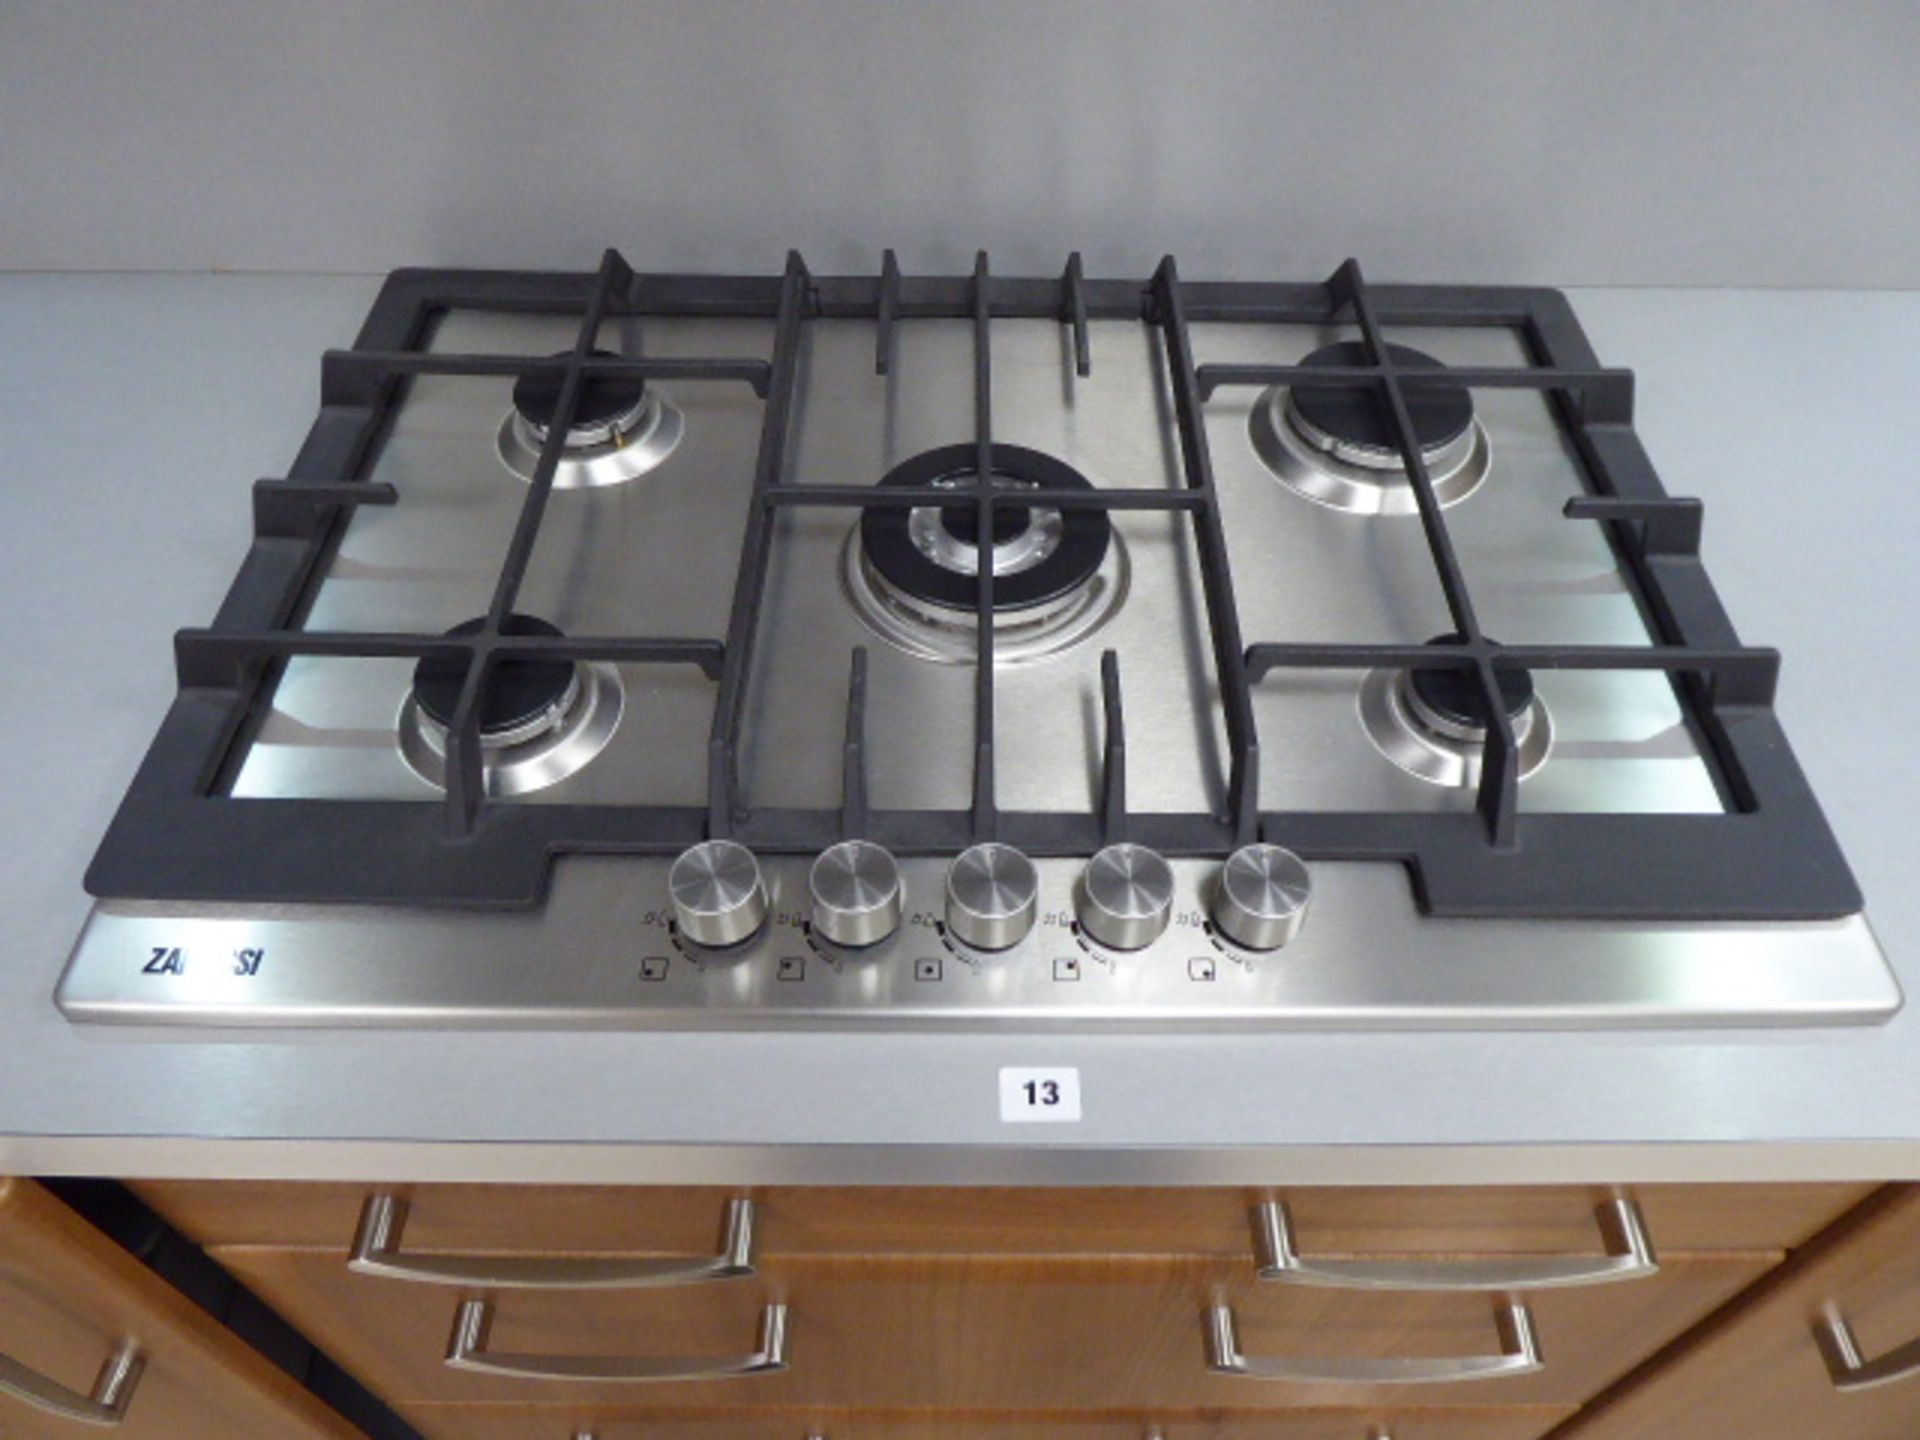 Saponetta Amati kitchen with metal appearance laminate worktops. With max measurements 220cm x 230cm - Image 11 of 20